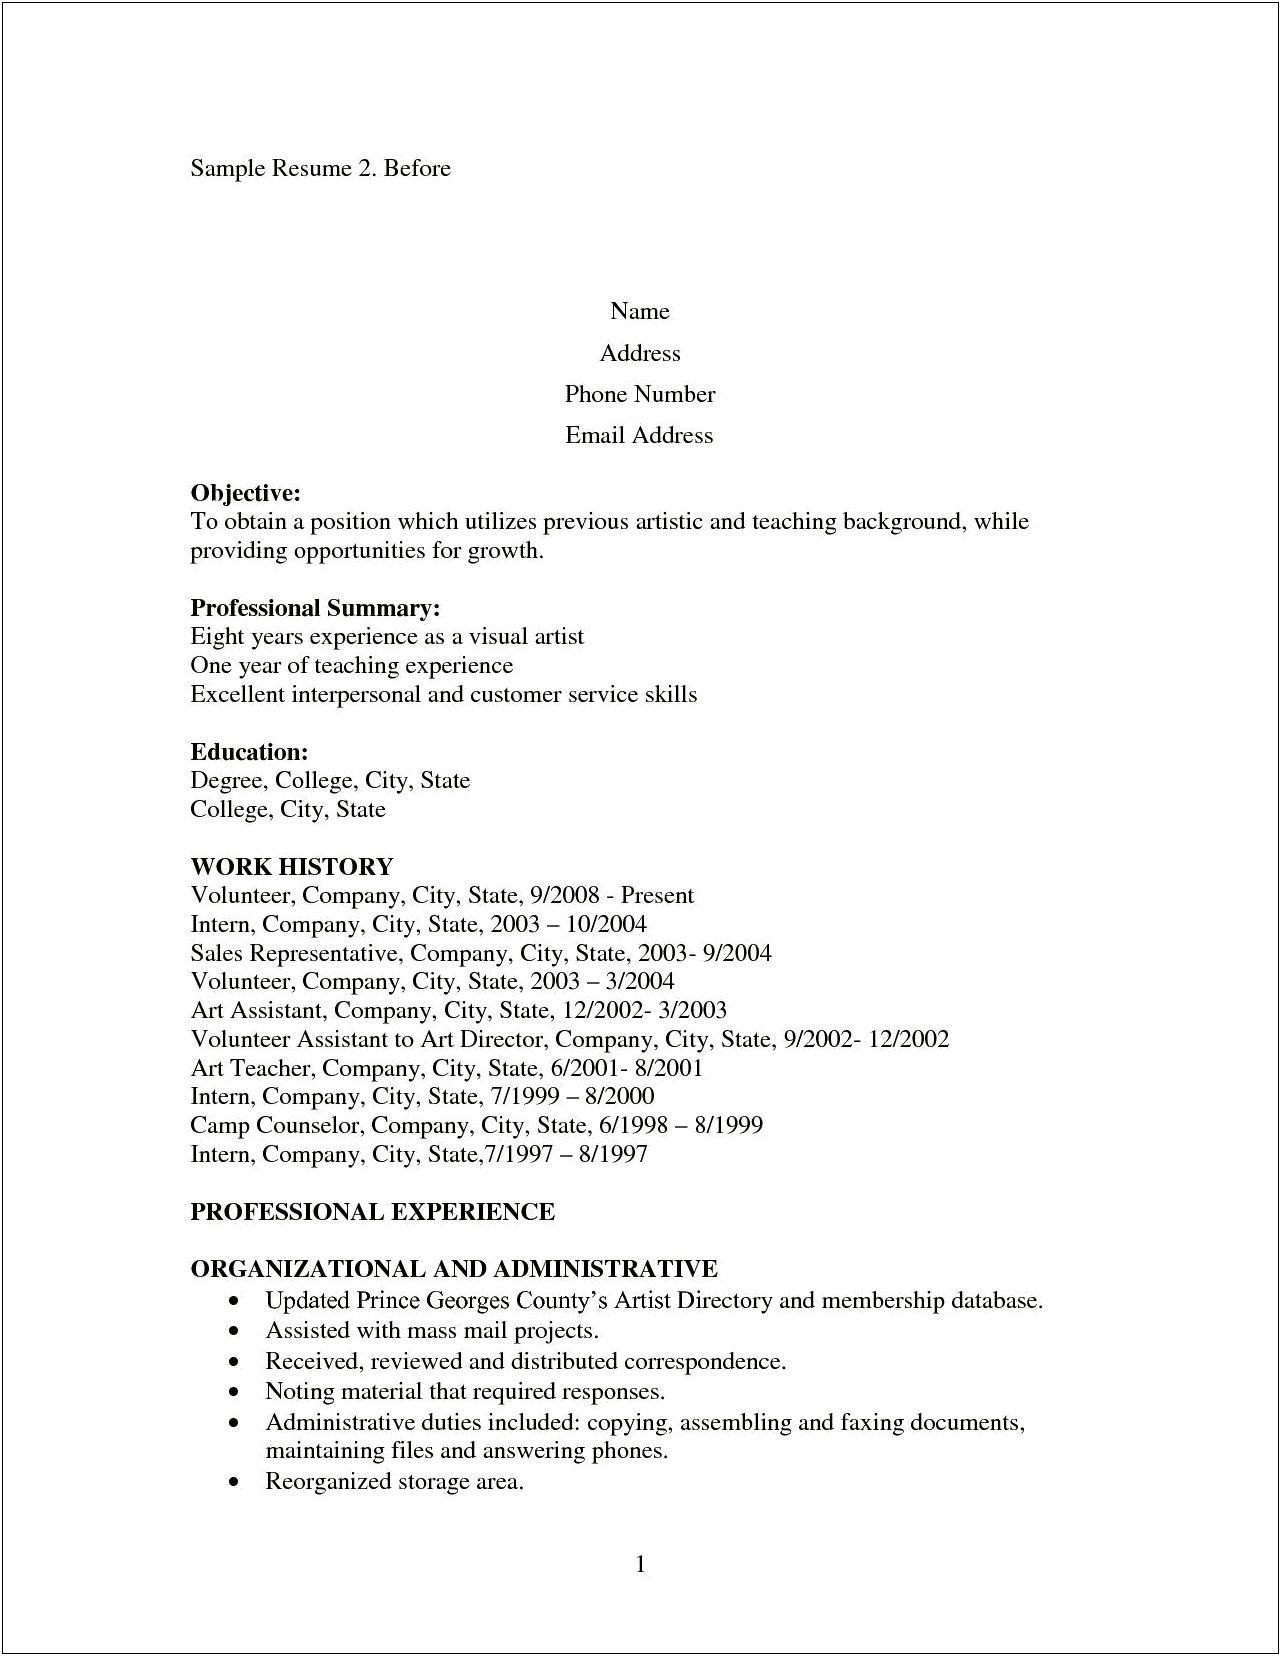 Resume Objective Samples For Stay At Home Moms